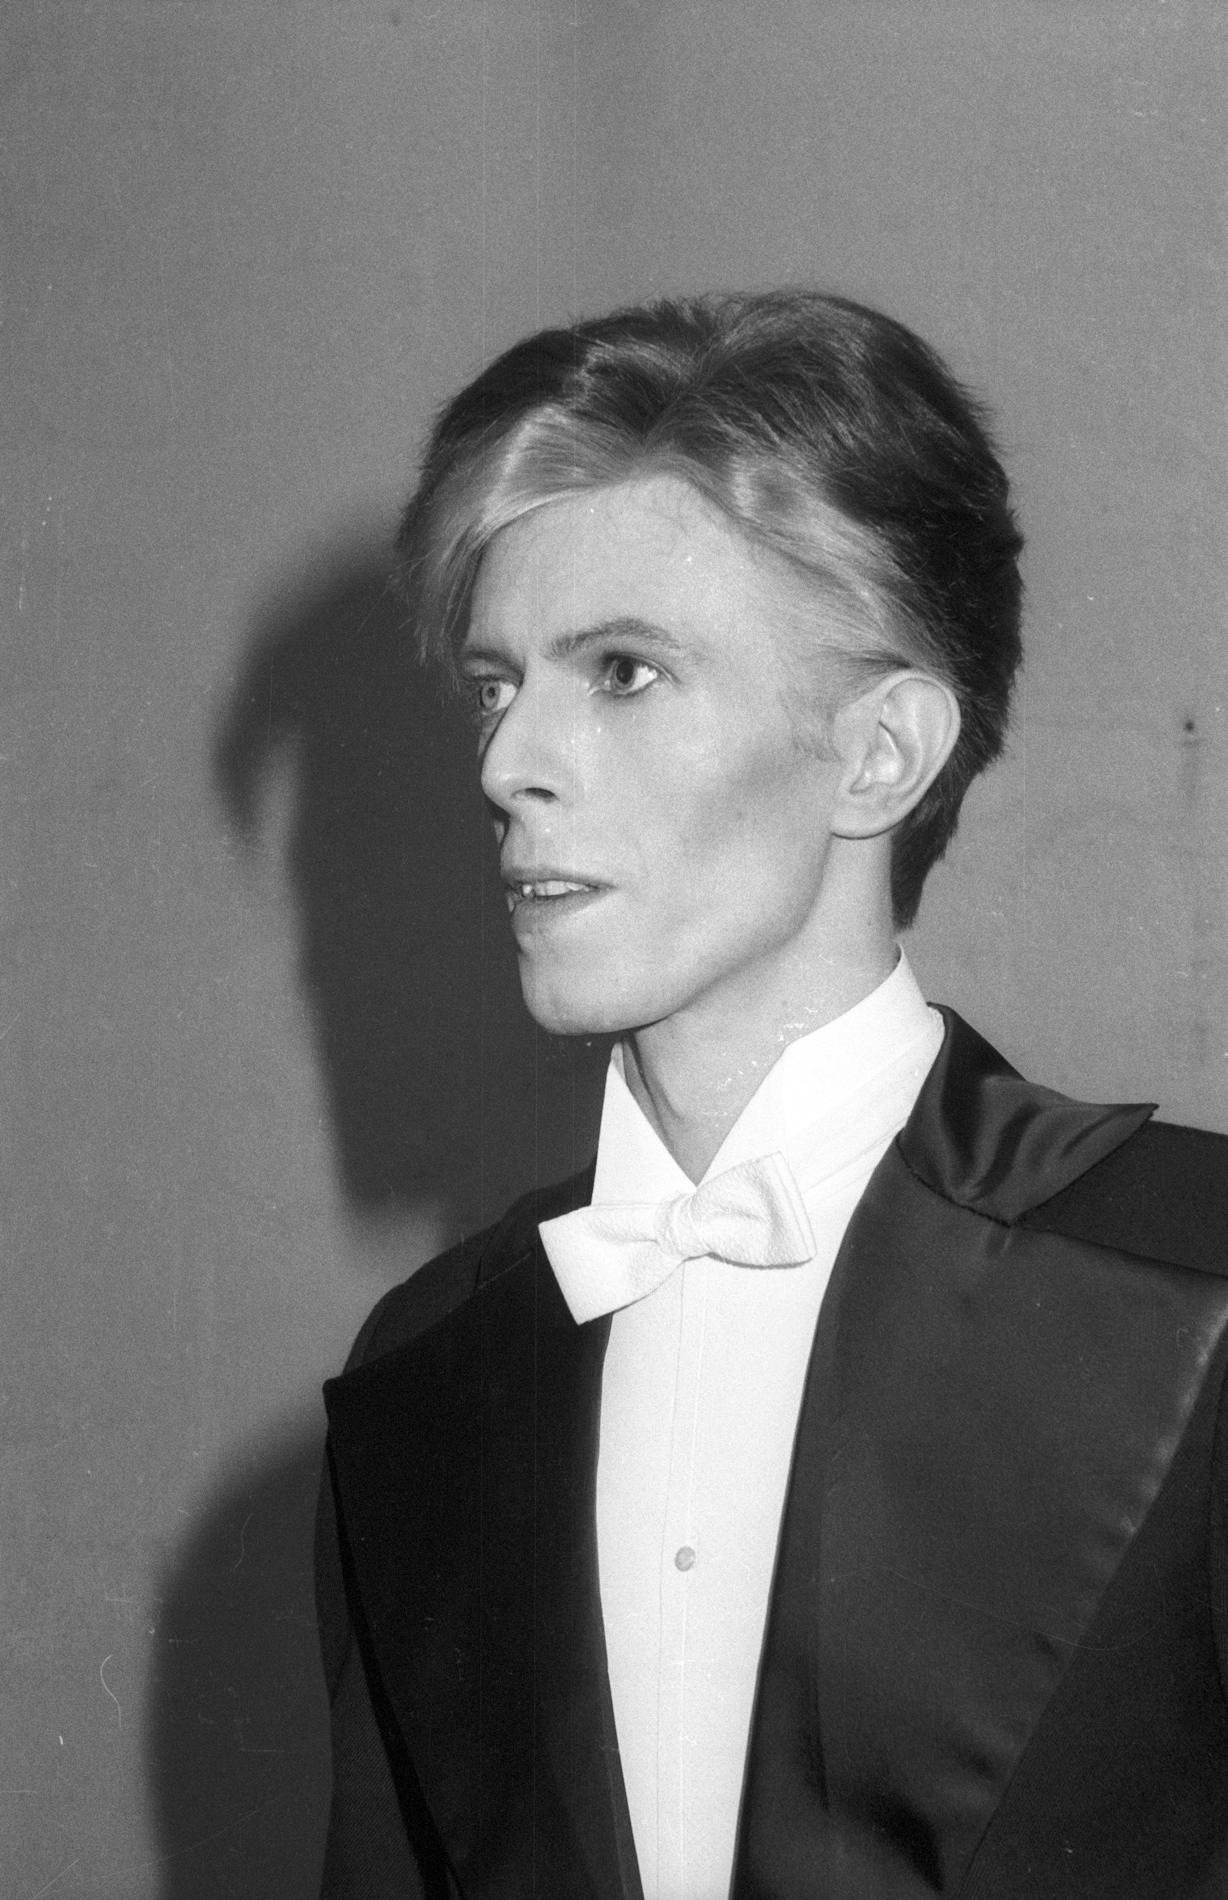 David Bowie's Most Iconic Grammys Outfit Was A Low-Key Amazing Look For ...